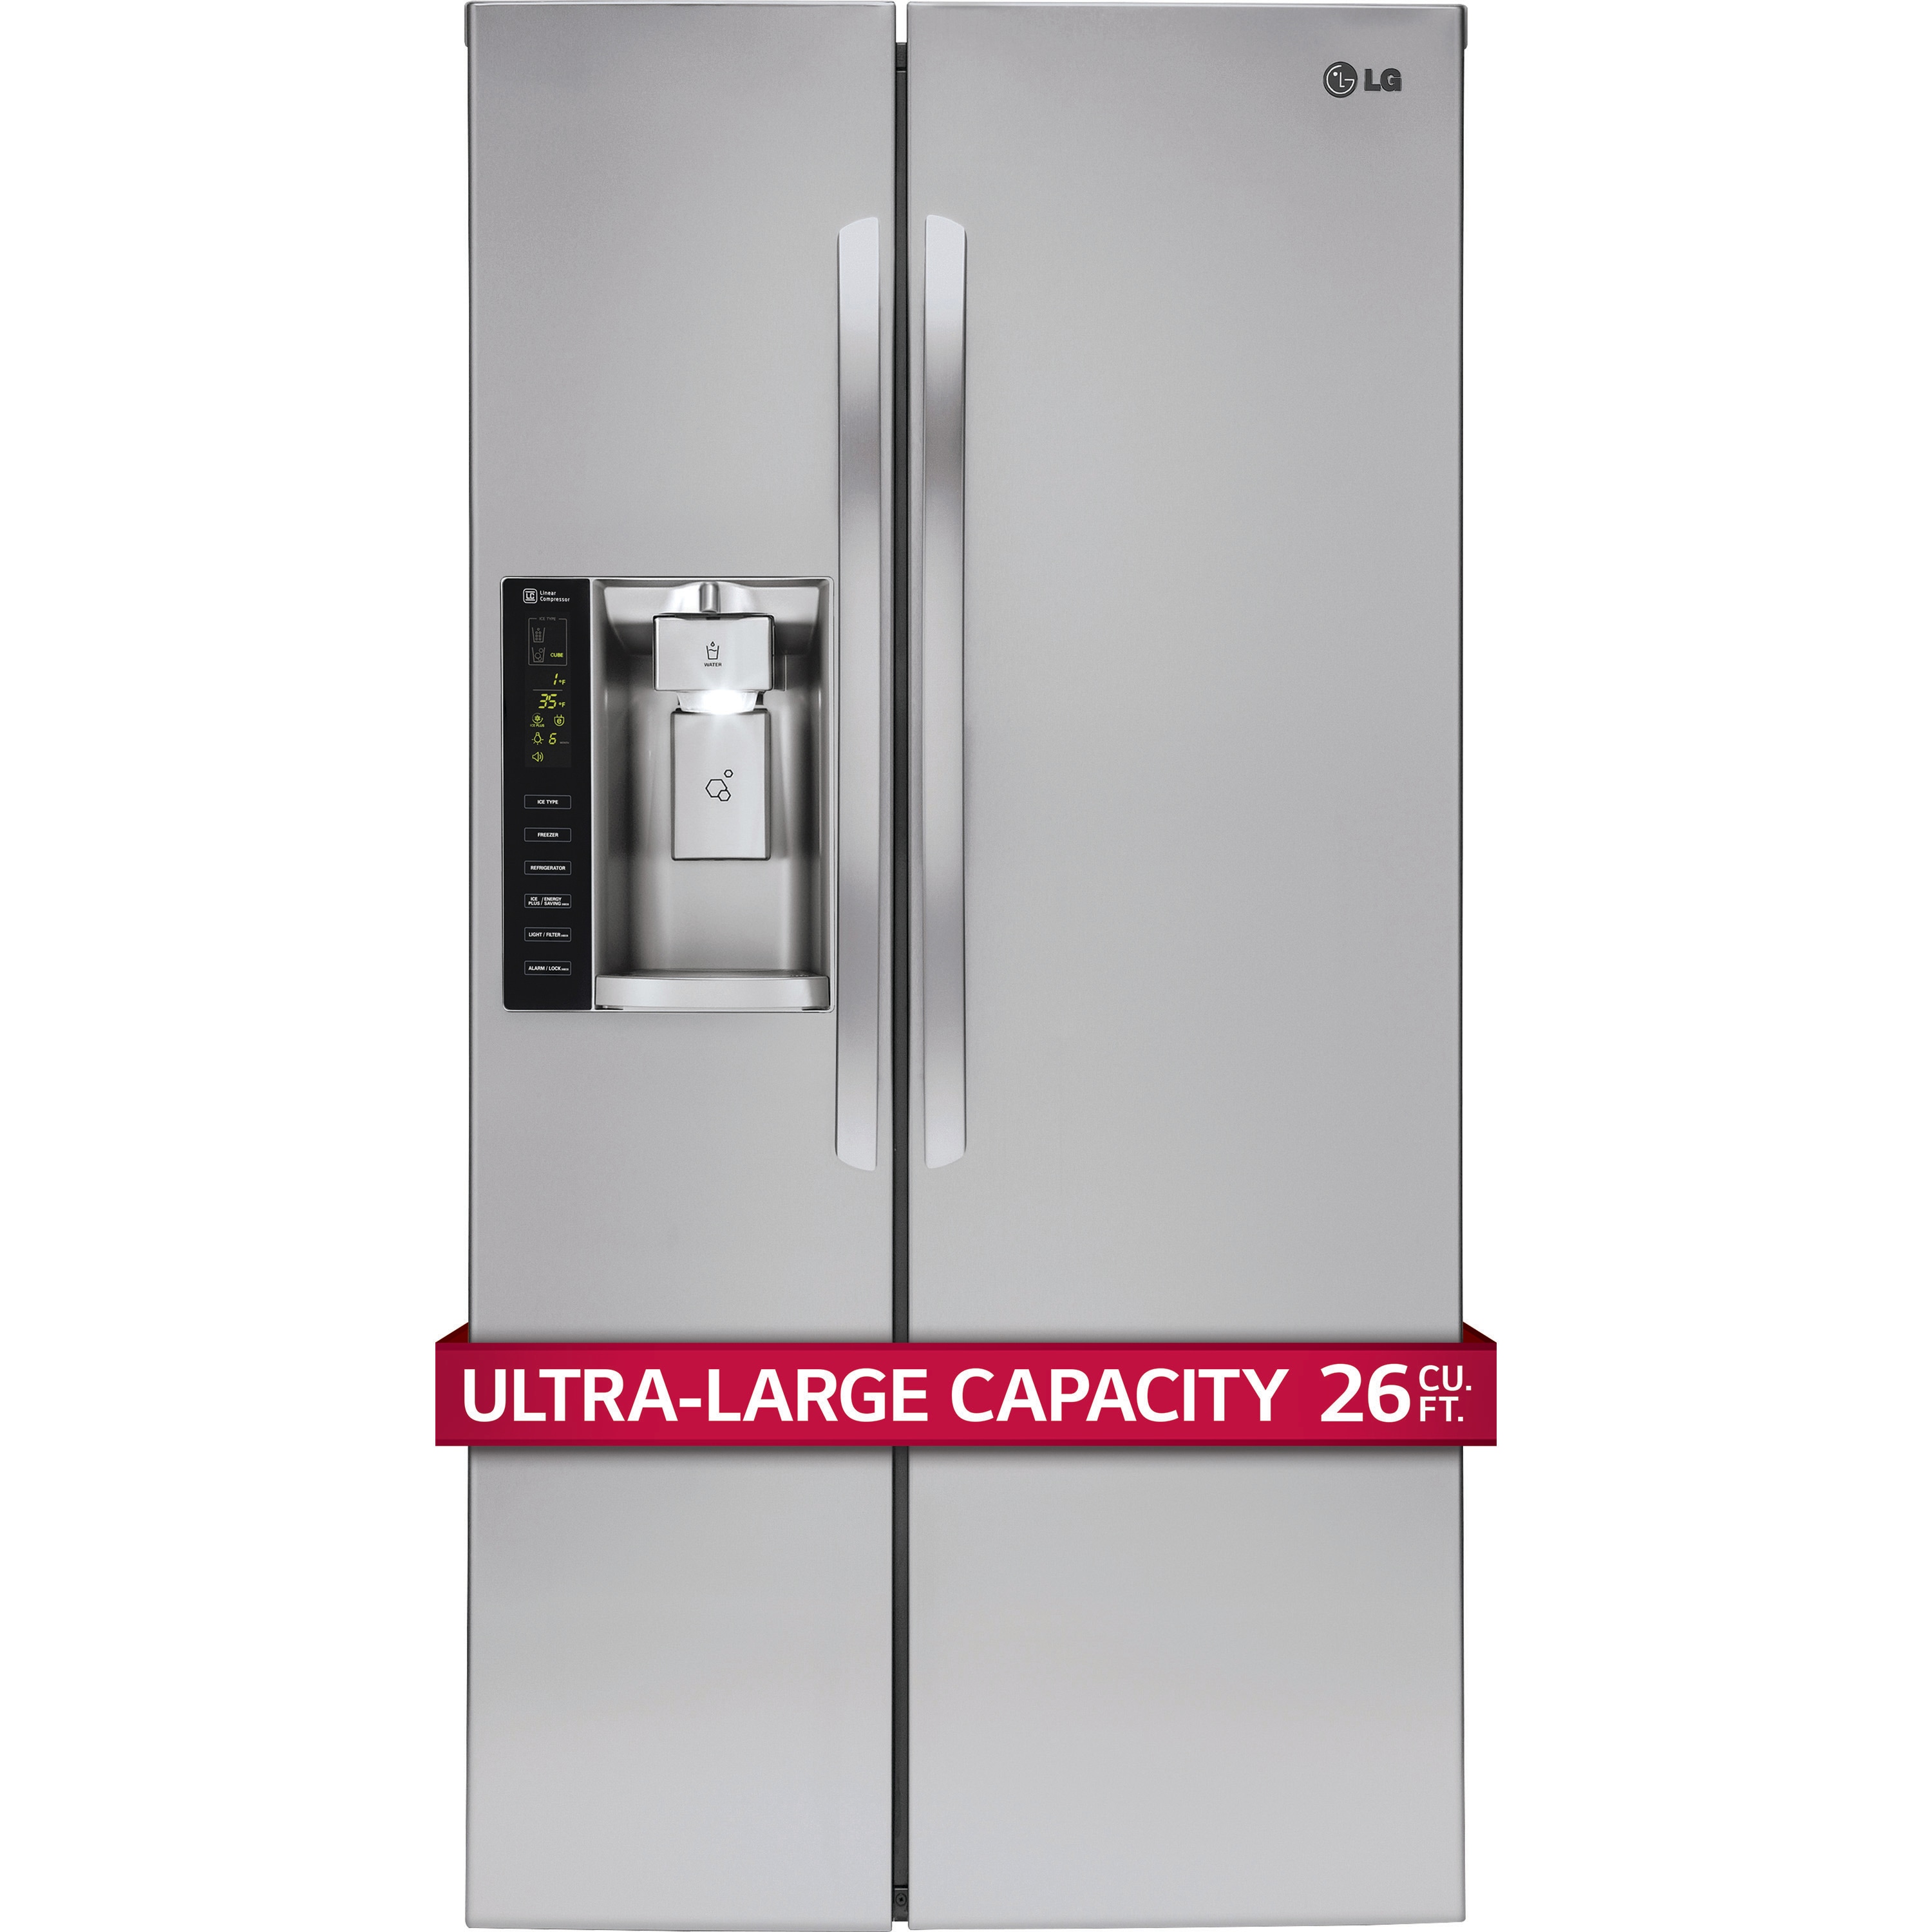 LG 26.2-cu ft Side-by-Side Refrigerator with Ice Maker (Stainless